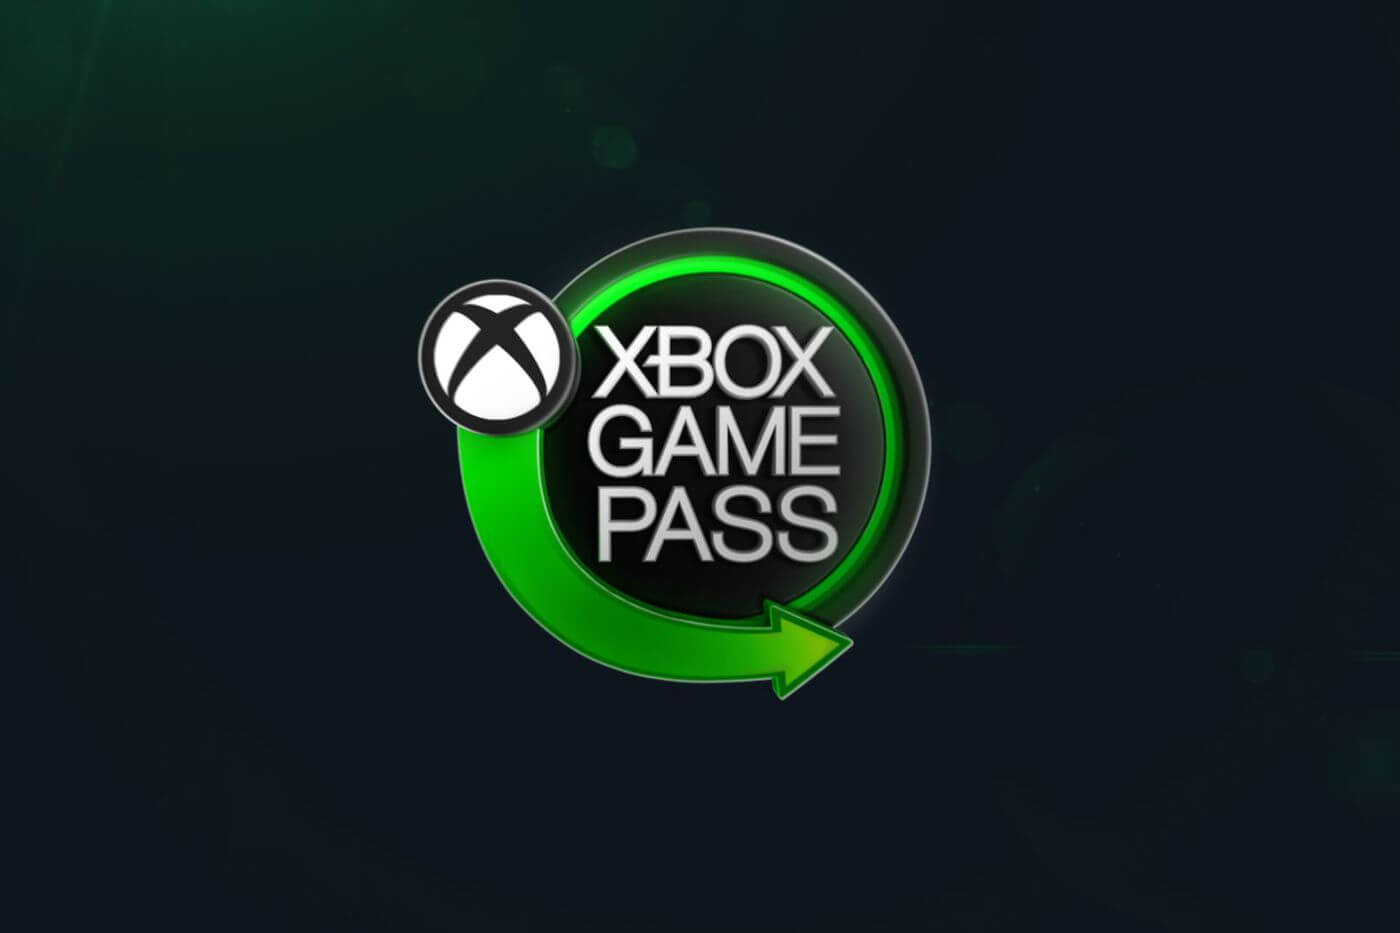 Top Turn-Based Games you can play with Xbox Game Pass - 2022 - Part II